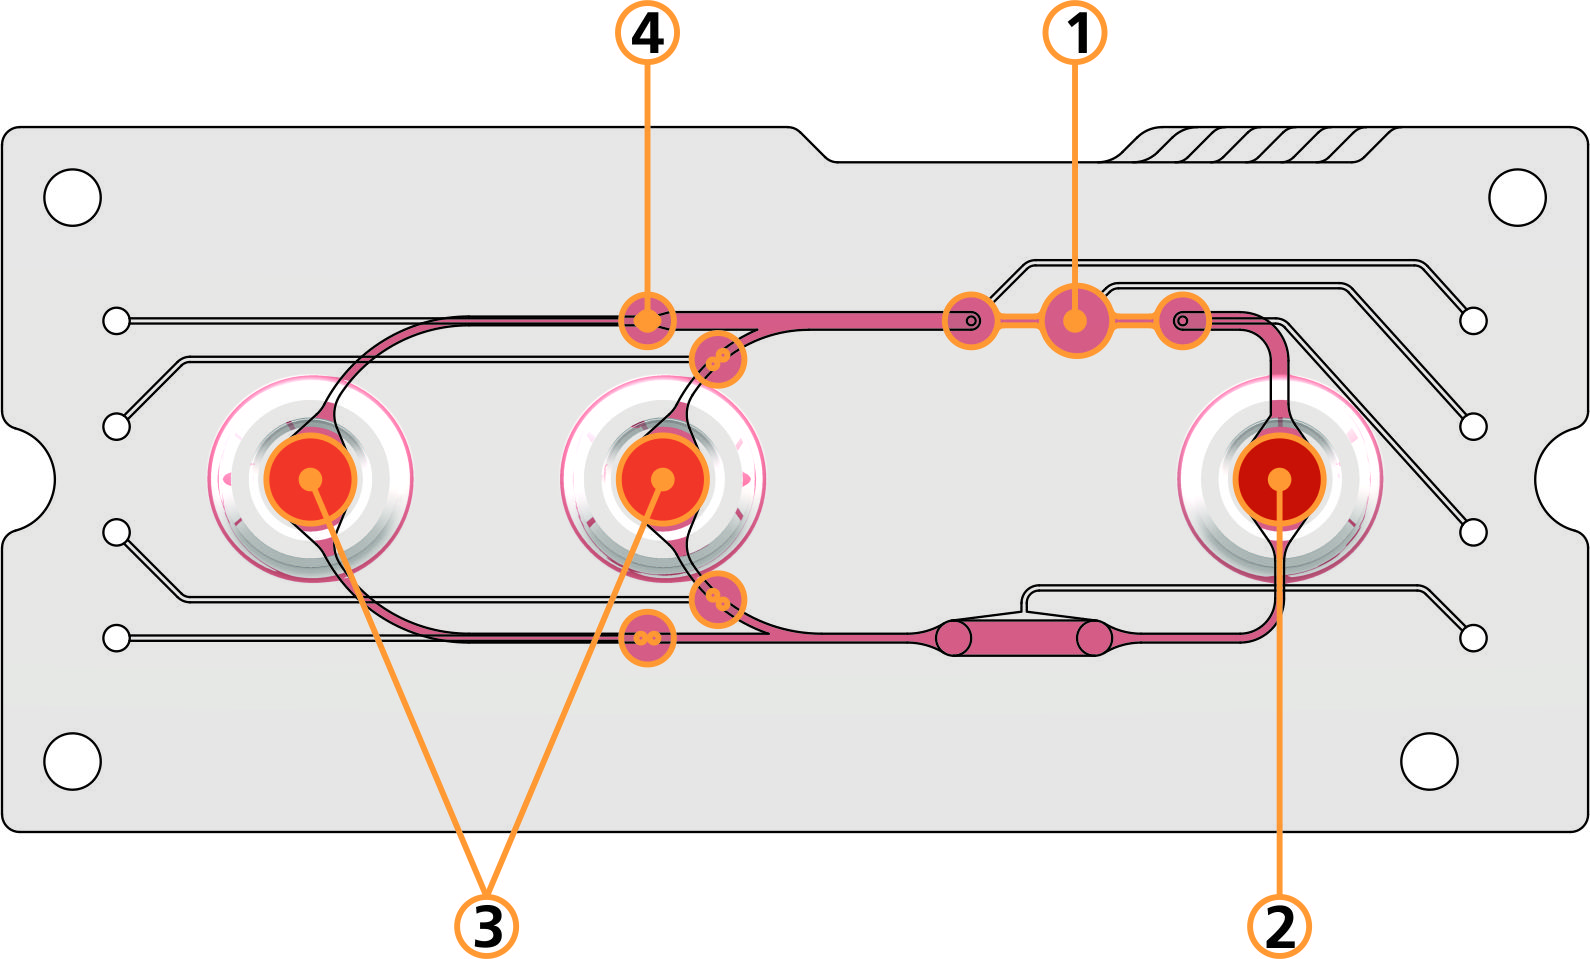 On the multi-organ chip, several technical components simulate the interaction of blood circulation and organs in the human body. These include a pump (1), a storage chamber for blood and active substance (2), chambers for organs and tissue (3) and valves (4), which simulate the varying blood flow to different organs.